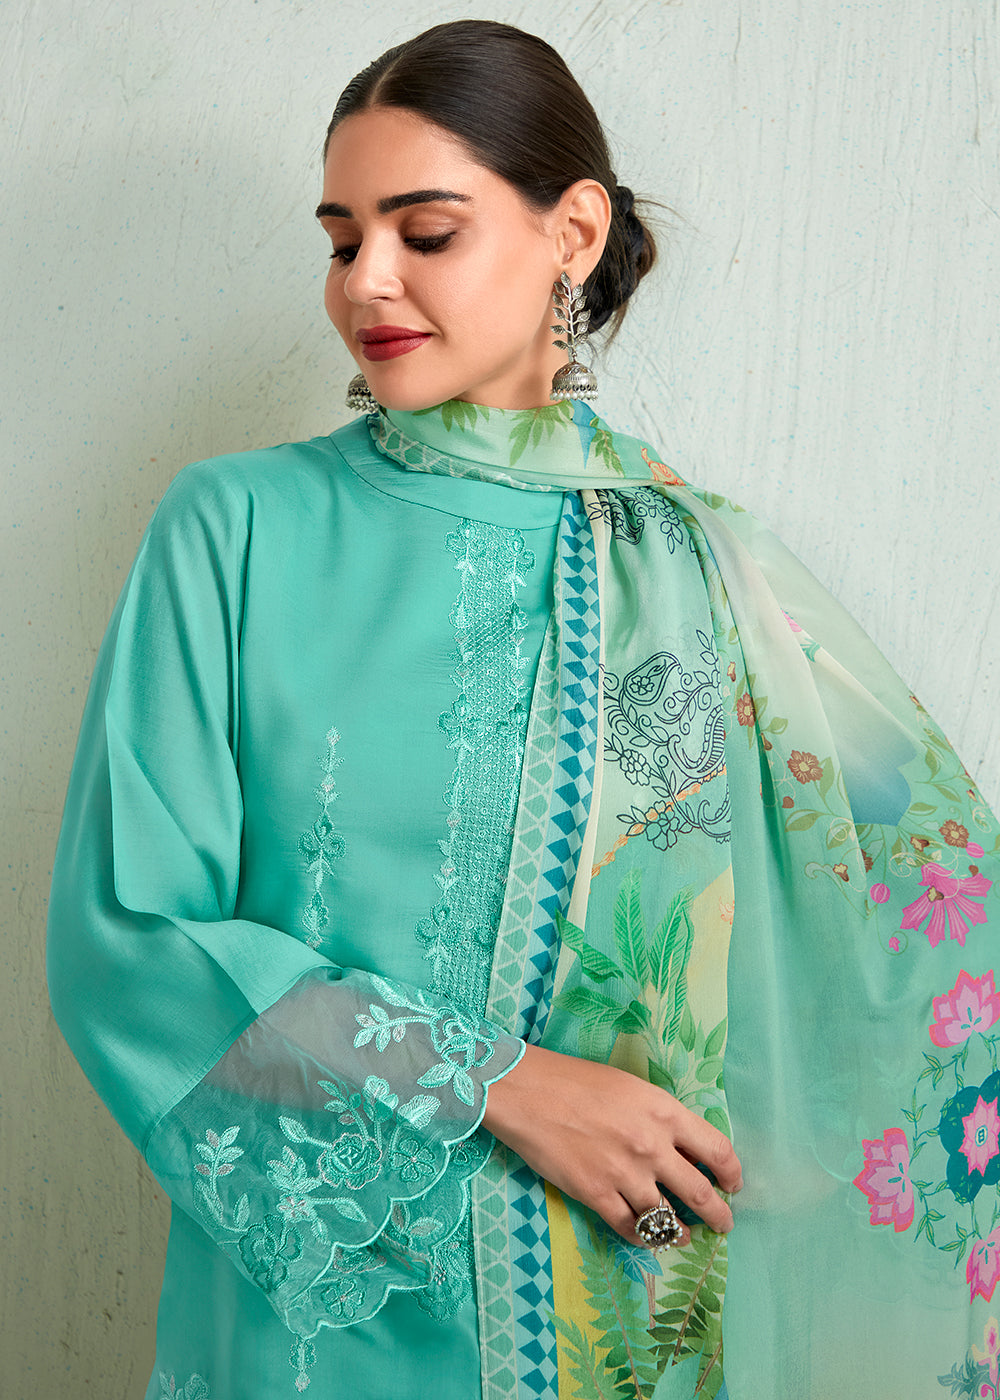 Buy Now Turquoise Blue Pure Muslin Resham Embroidered Salwar Suit Online in USA, UK, Canada, Germany, Australia & Worldwide at Empress Clothing.